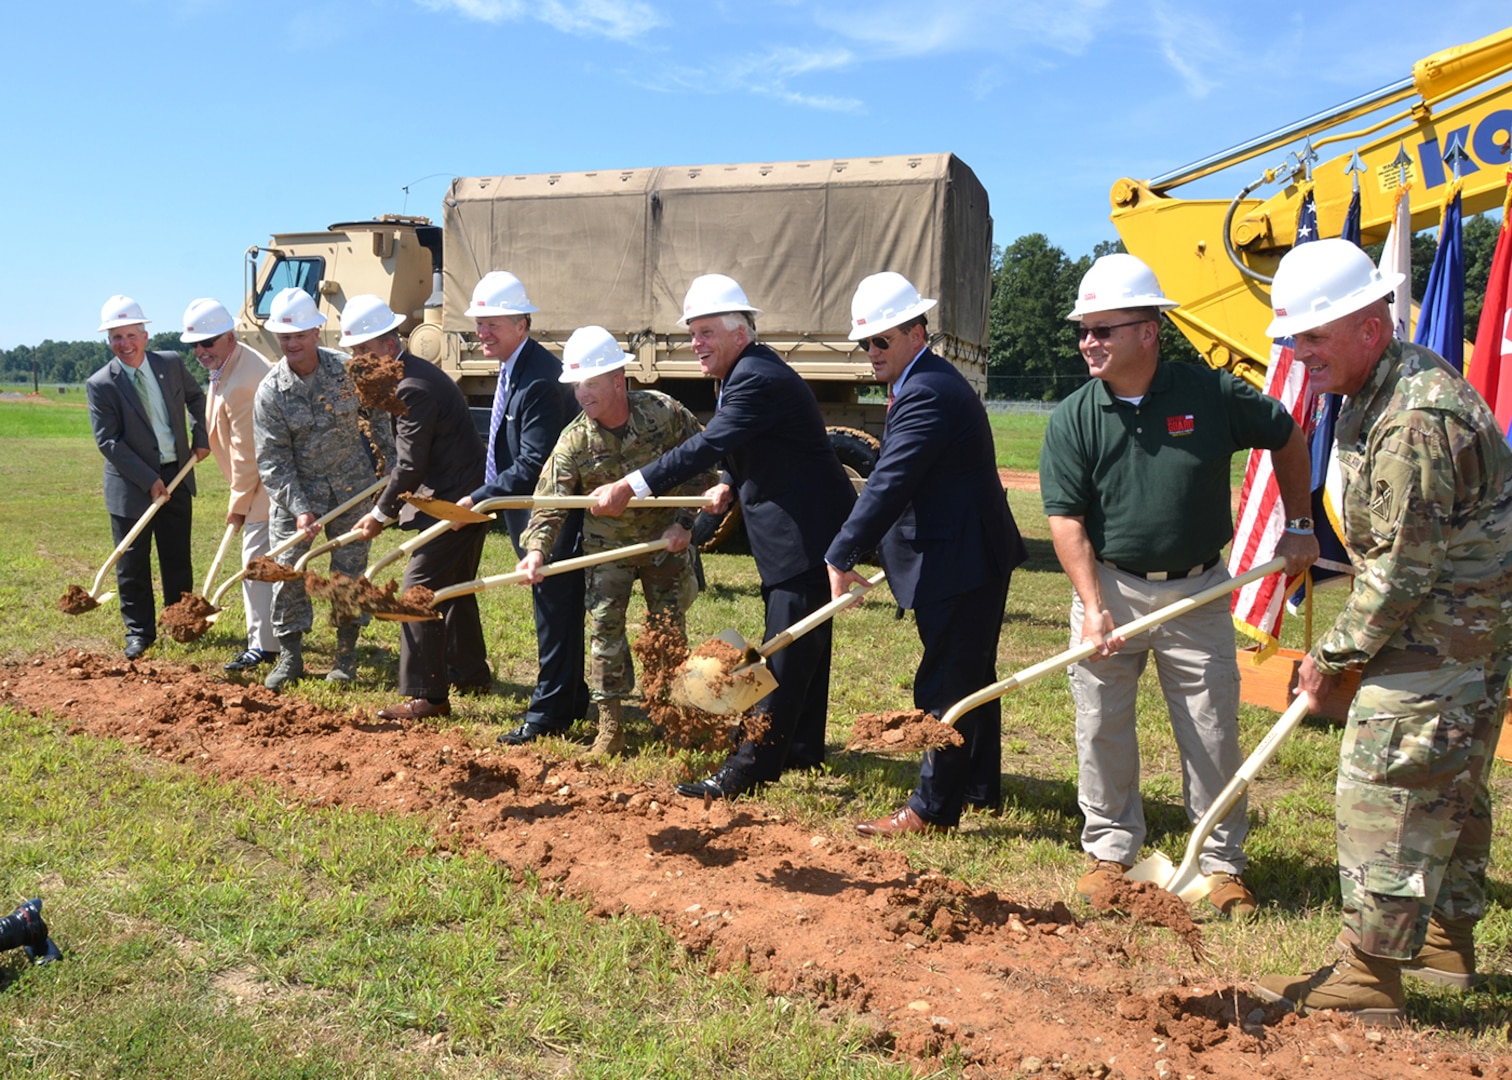 Project partners and organizers ceremoniously break the ground for the Virginia National Guard’s new 102-square-foot headquarters facility on Defense Supply Center Richmond. Among the dirt-turners were Virginia Governor Terry McAuliffe, Maj. Gen. Timothy Williams, the Adjutant General of Virginia and Defense Logistics Agency Aviation and DSCR Commander Air Force Brig. Gen. Allan Day. The building, once completed in February 2018, will be Leadership in Energy and Environmental Design certified Silver. (Photo by Jackie Roberts) 